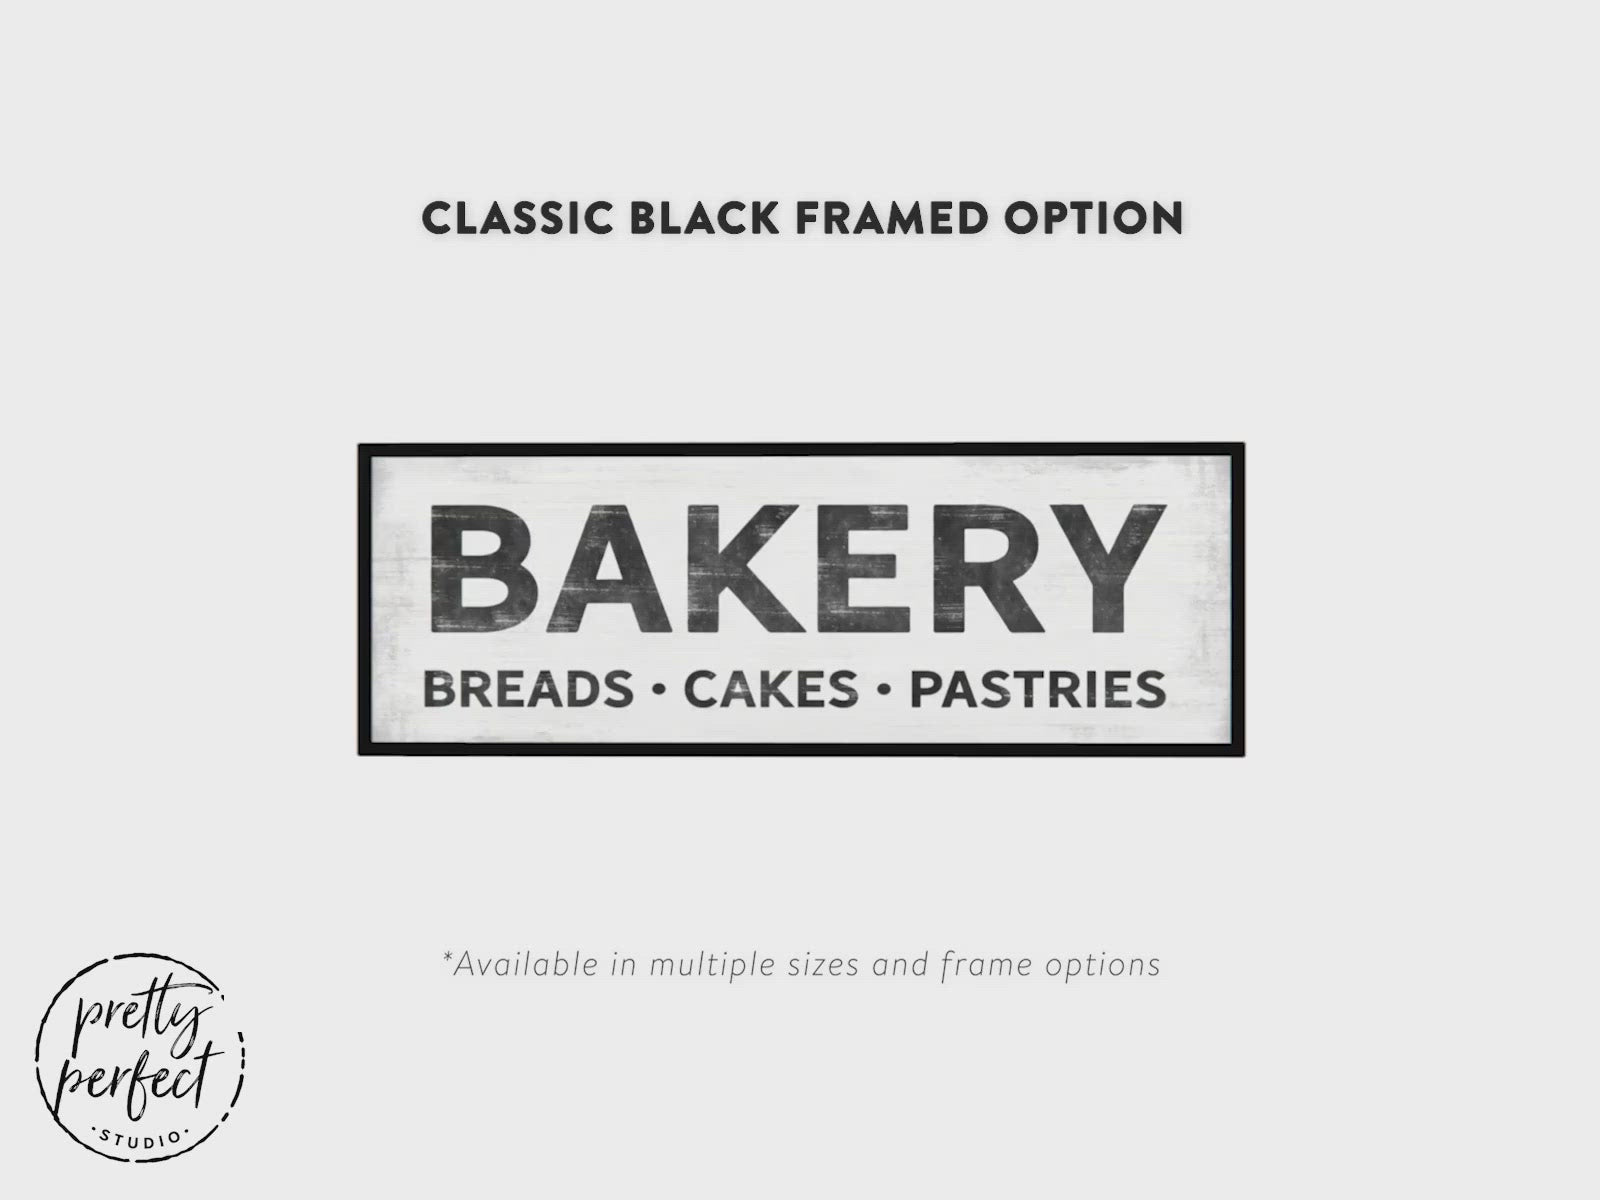 Bakery, Breads, Cakes, Pastries Kitchen Sign Product Video - Pretty Perfect Studio